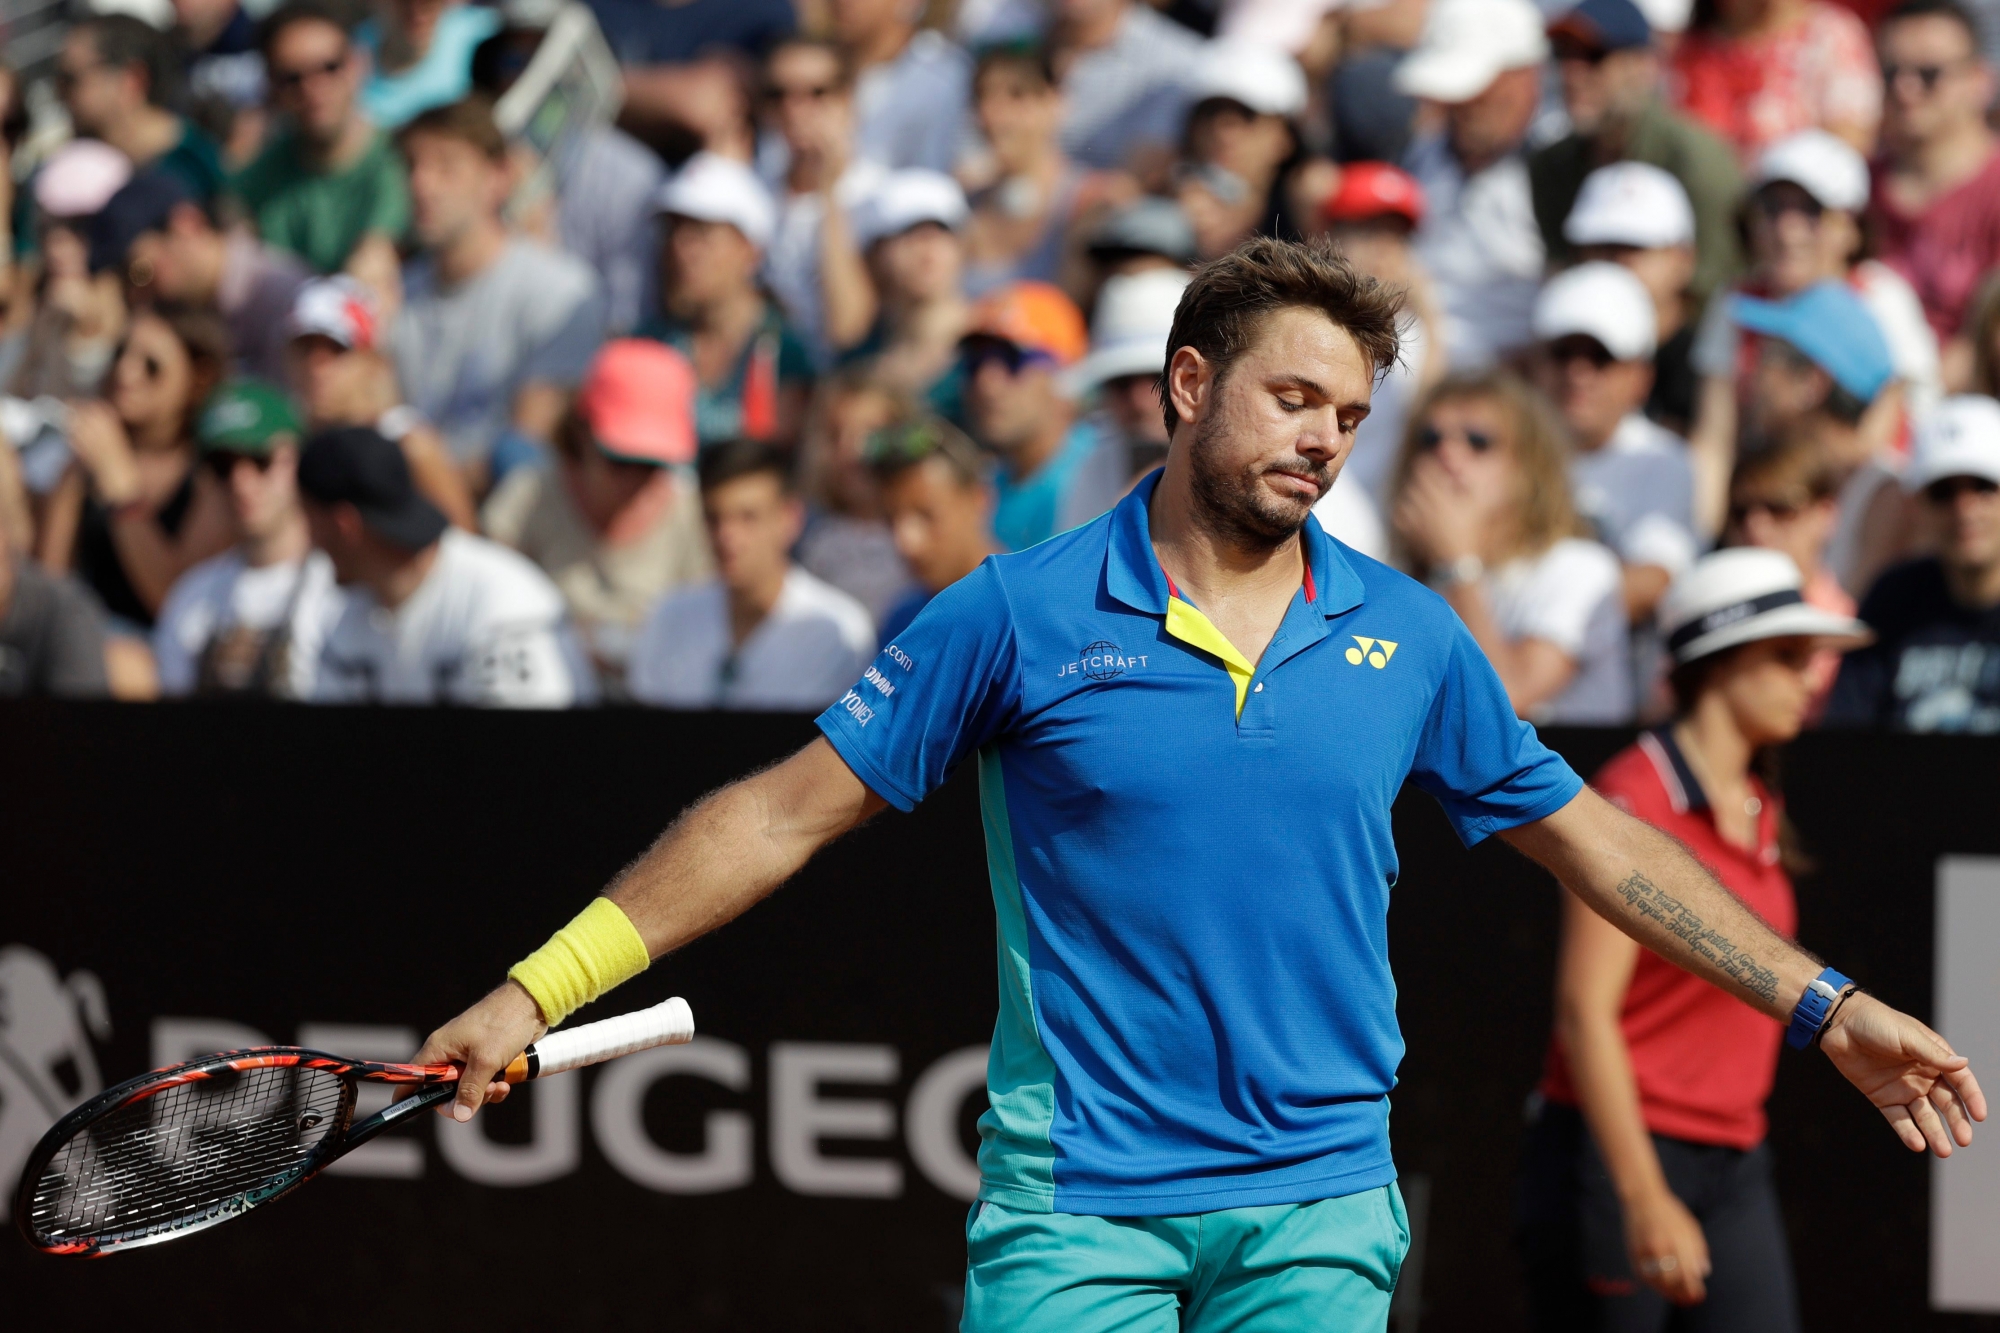 Switzerland's Stan Wawrinka reacts after losing a point during his match against John Isner, of the U.S. at the Italian Open tennis tournament, in Rome, Thursday, May 18, 2017. (AP Photo/Gregorio Borgia) Italy Tennis Italian Open